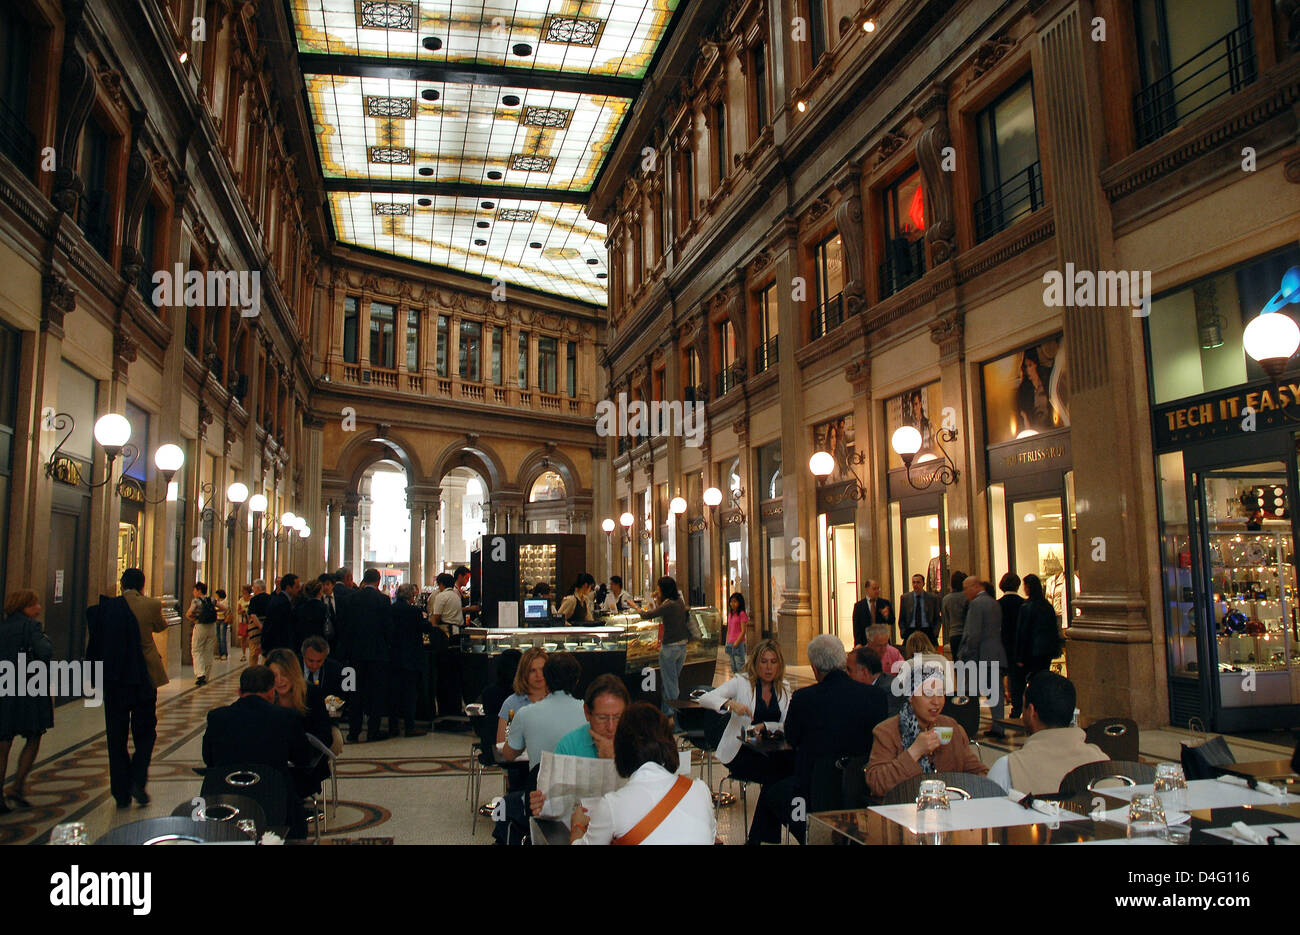 The picture shows shops and cafes in the Galleria Alberto Sordi at Via del Corso, Rome, Italy, 04 May 2008. Photo: A. Engelhardt Stock Photo